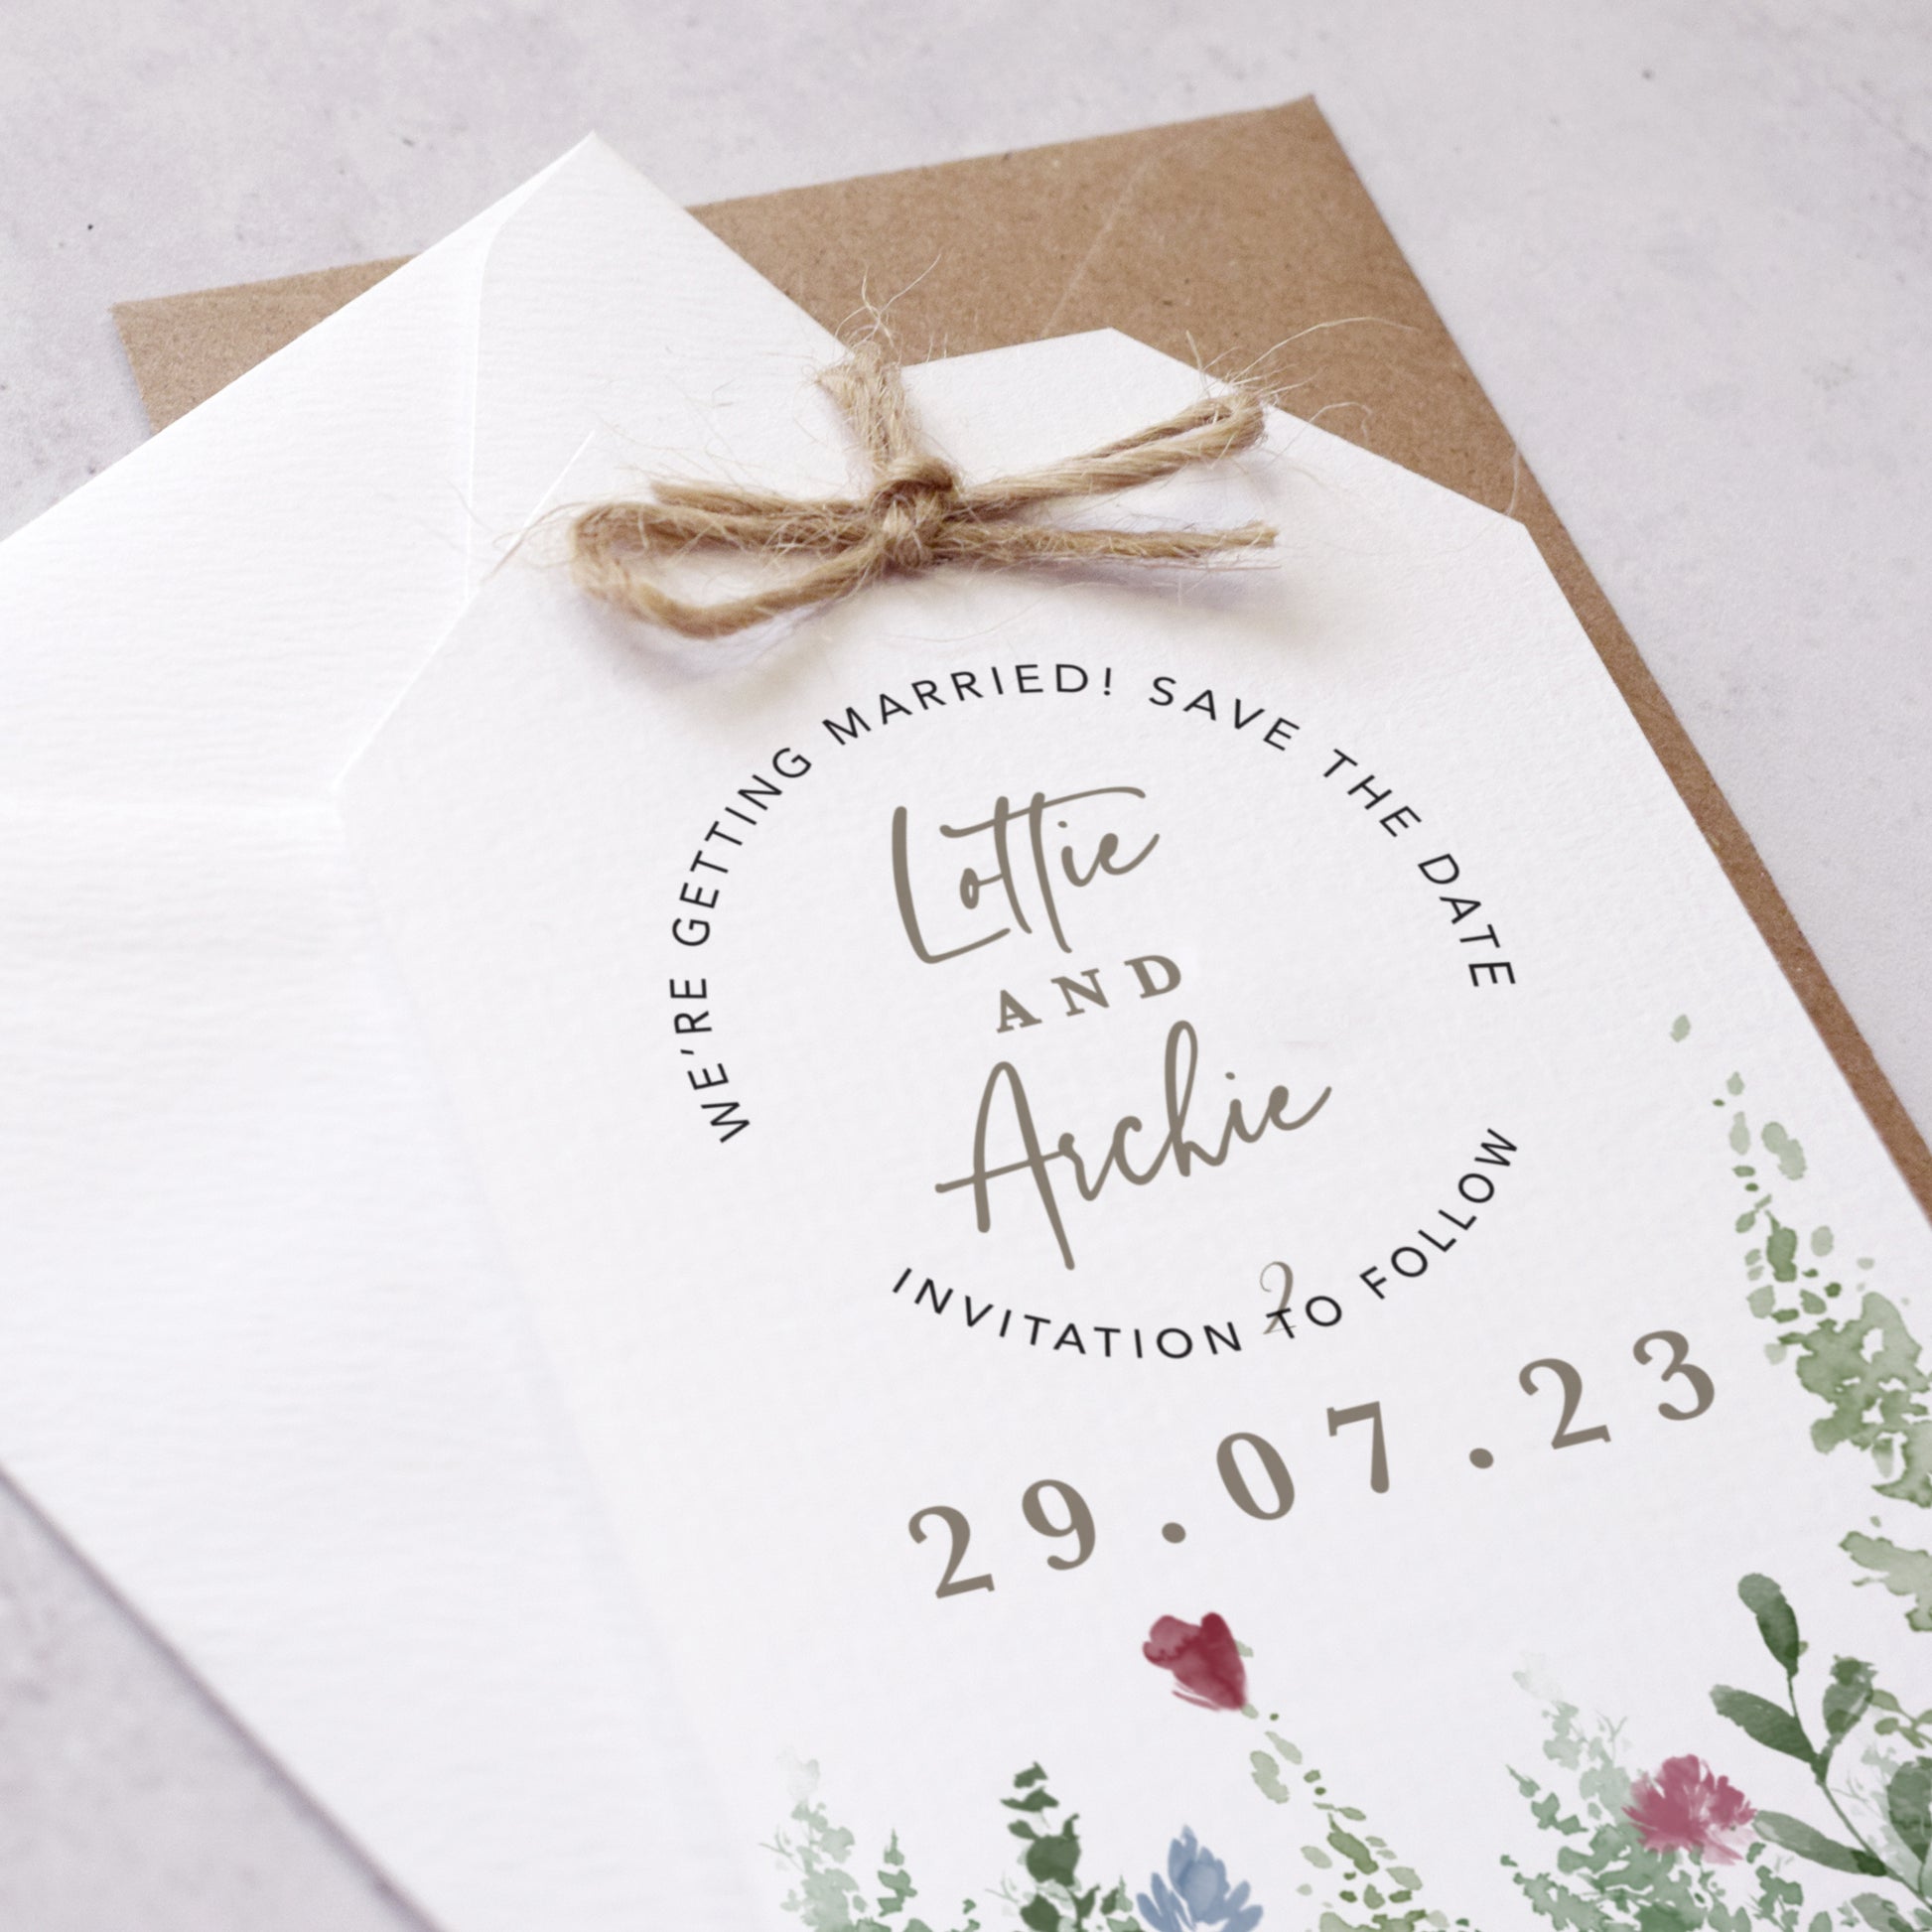 'Wildflower' Perosnalised Wedding Save the Date cards